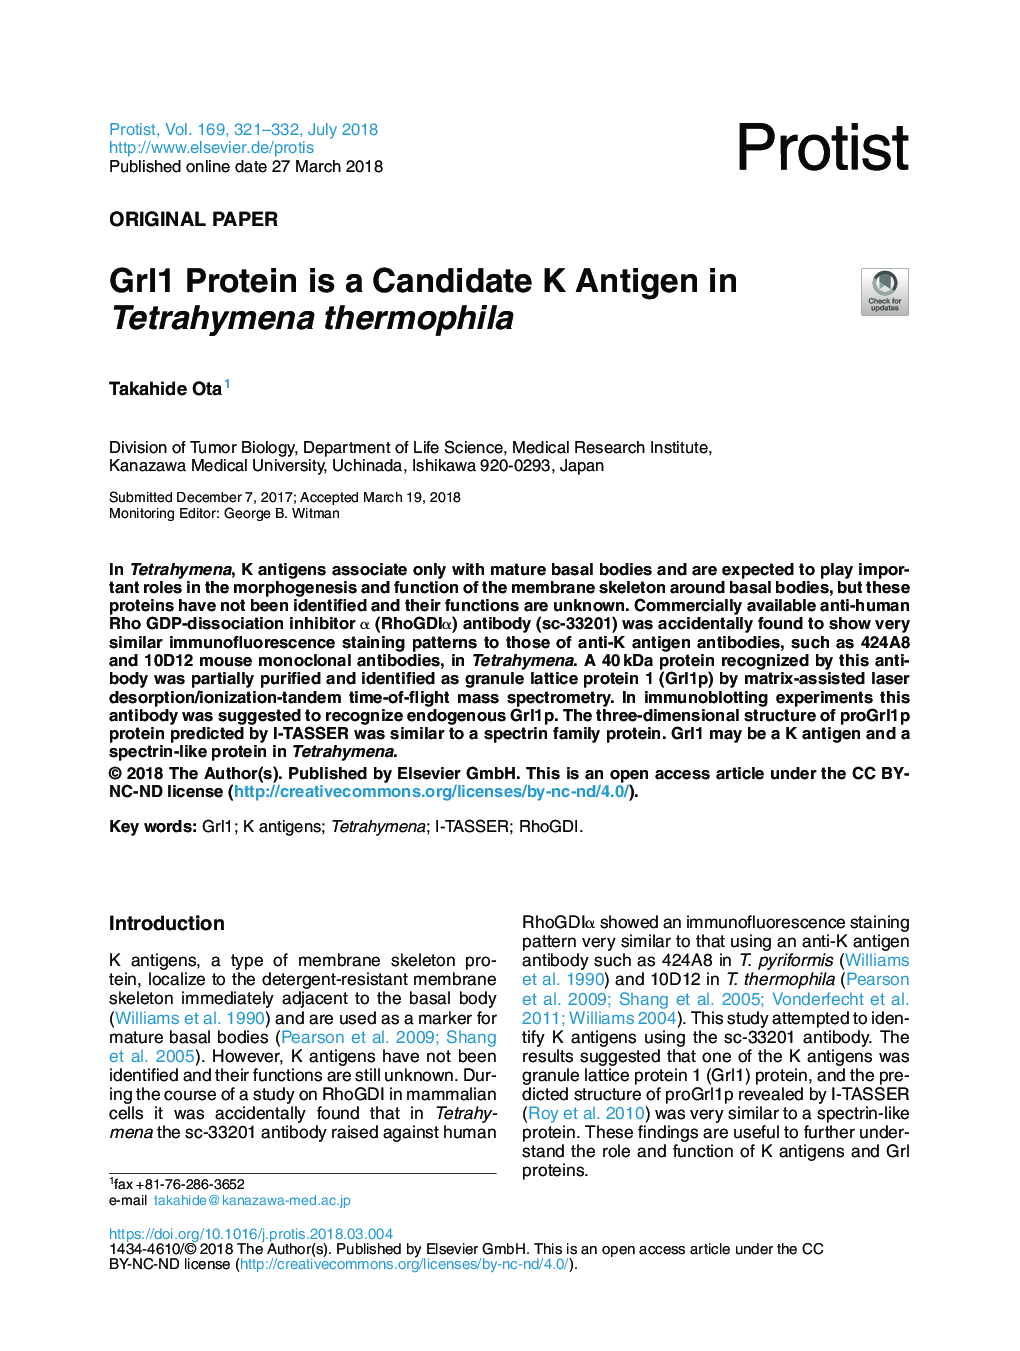 Grl1 Protein is a Candidate K Antigen in Tetrahymena thermophila